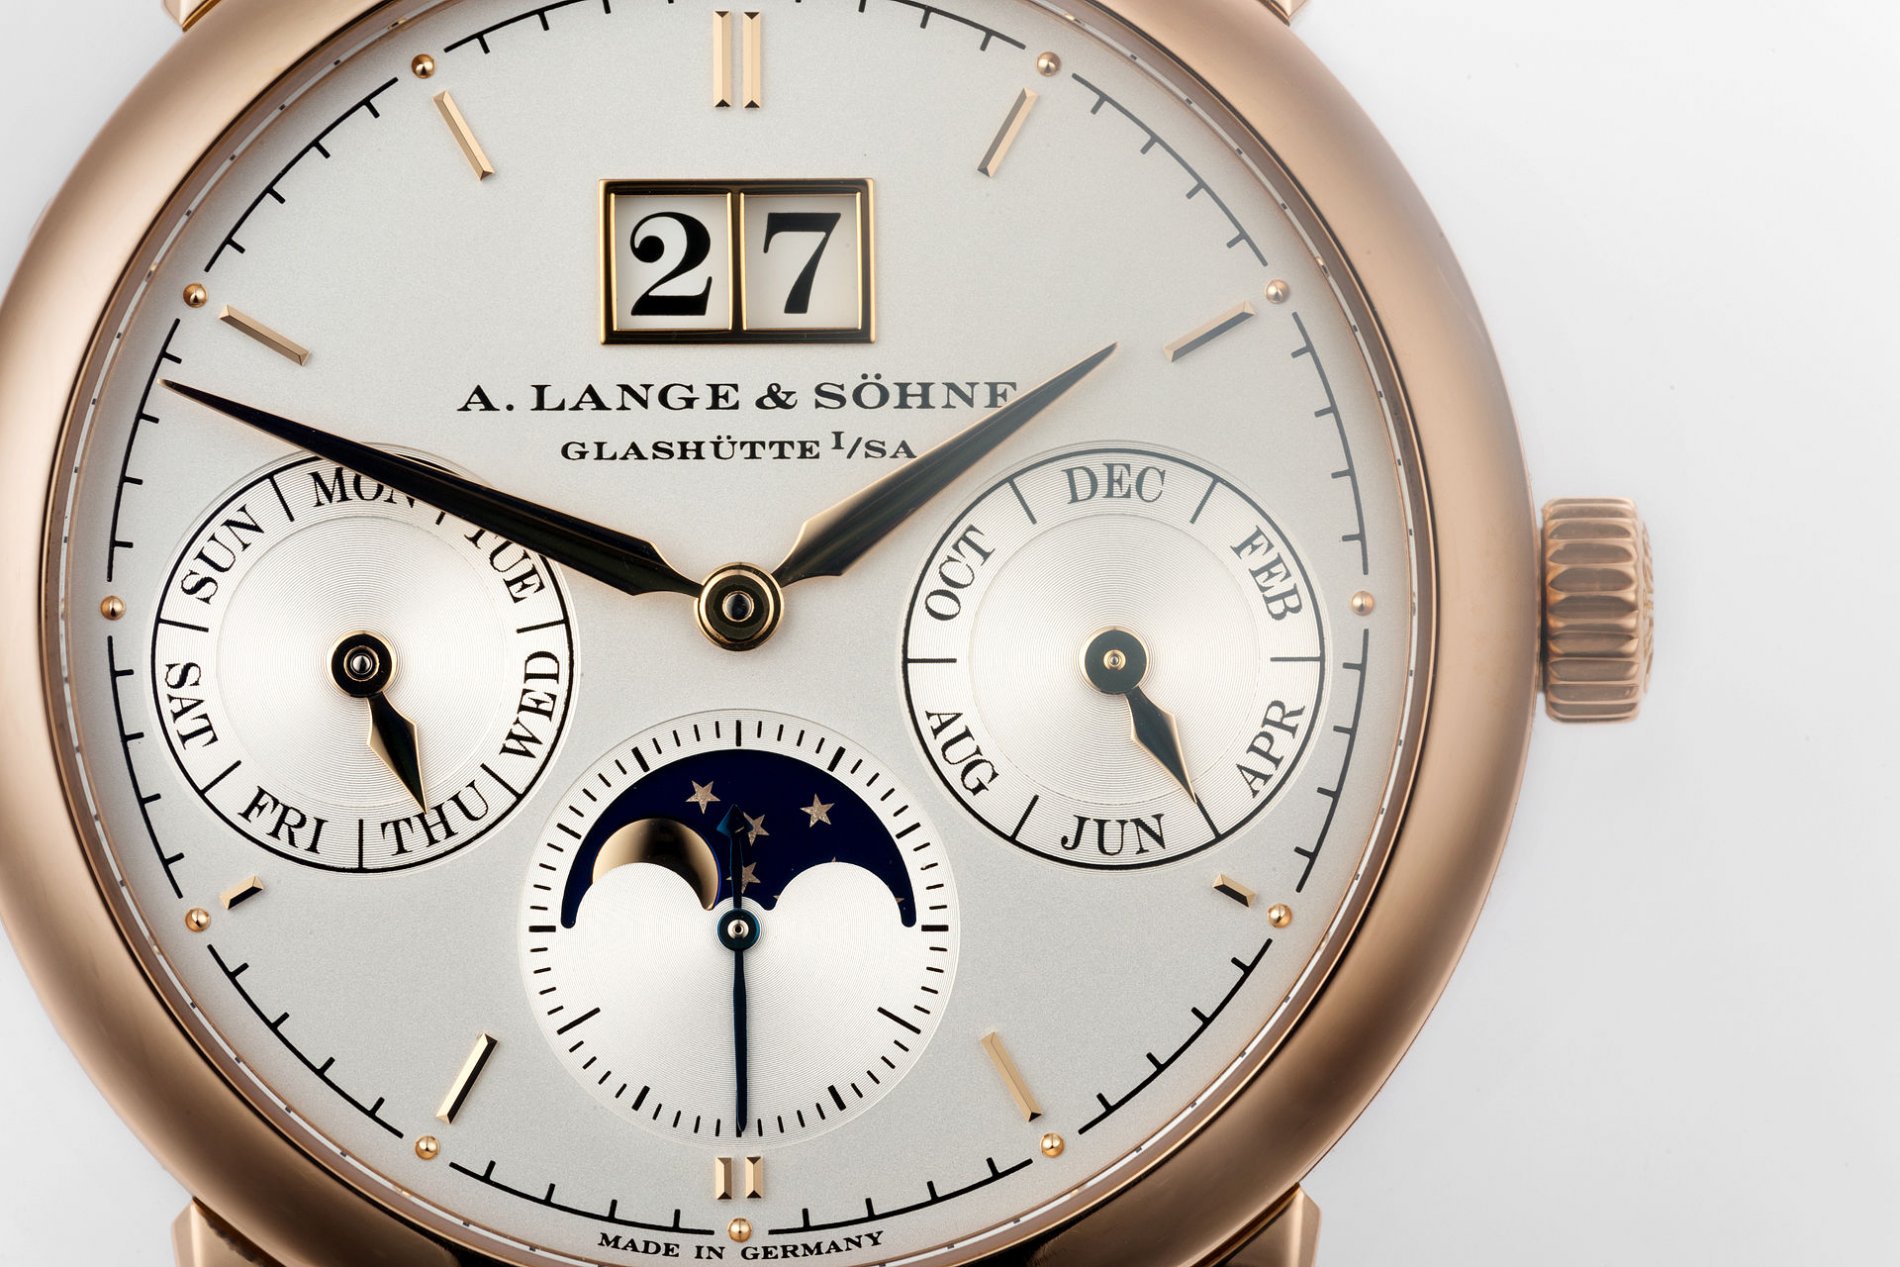   a-lange-and-sohne-saxonia-annual-calendar-385mm-18ct-rose-gold-ref-330032e-year-2011-1.jpeg